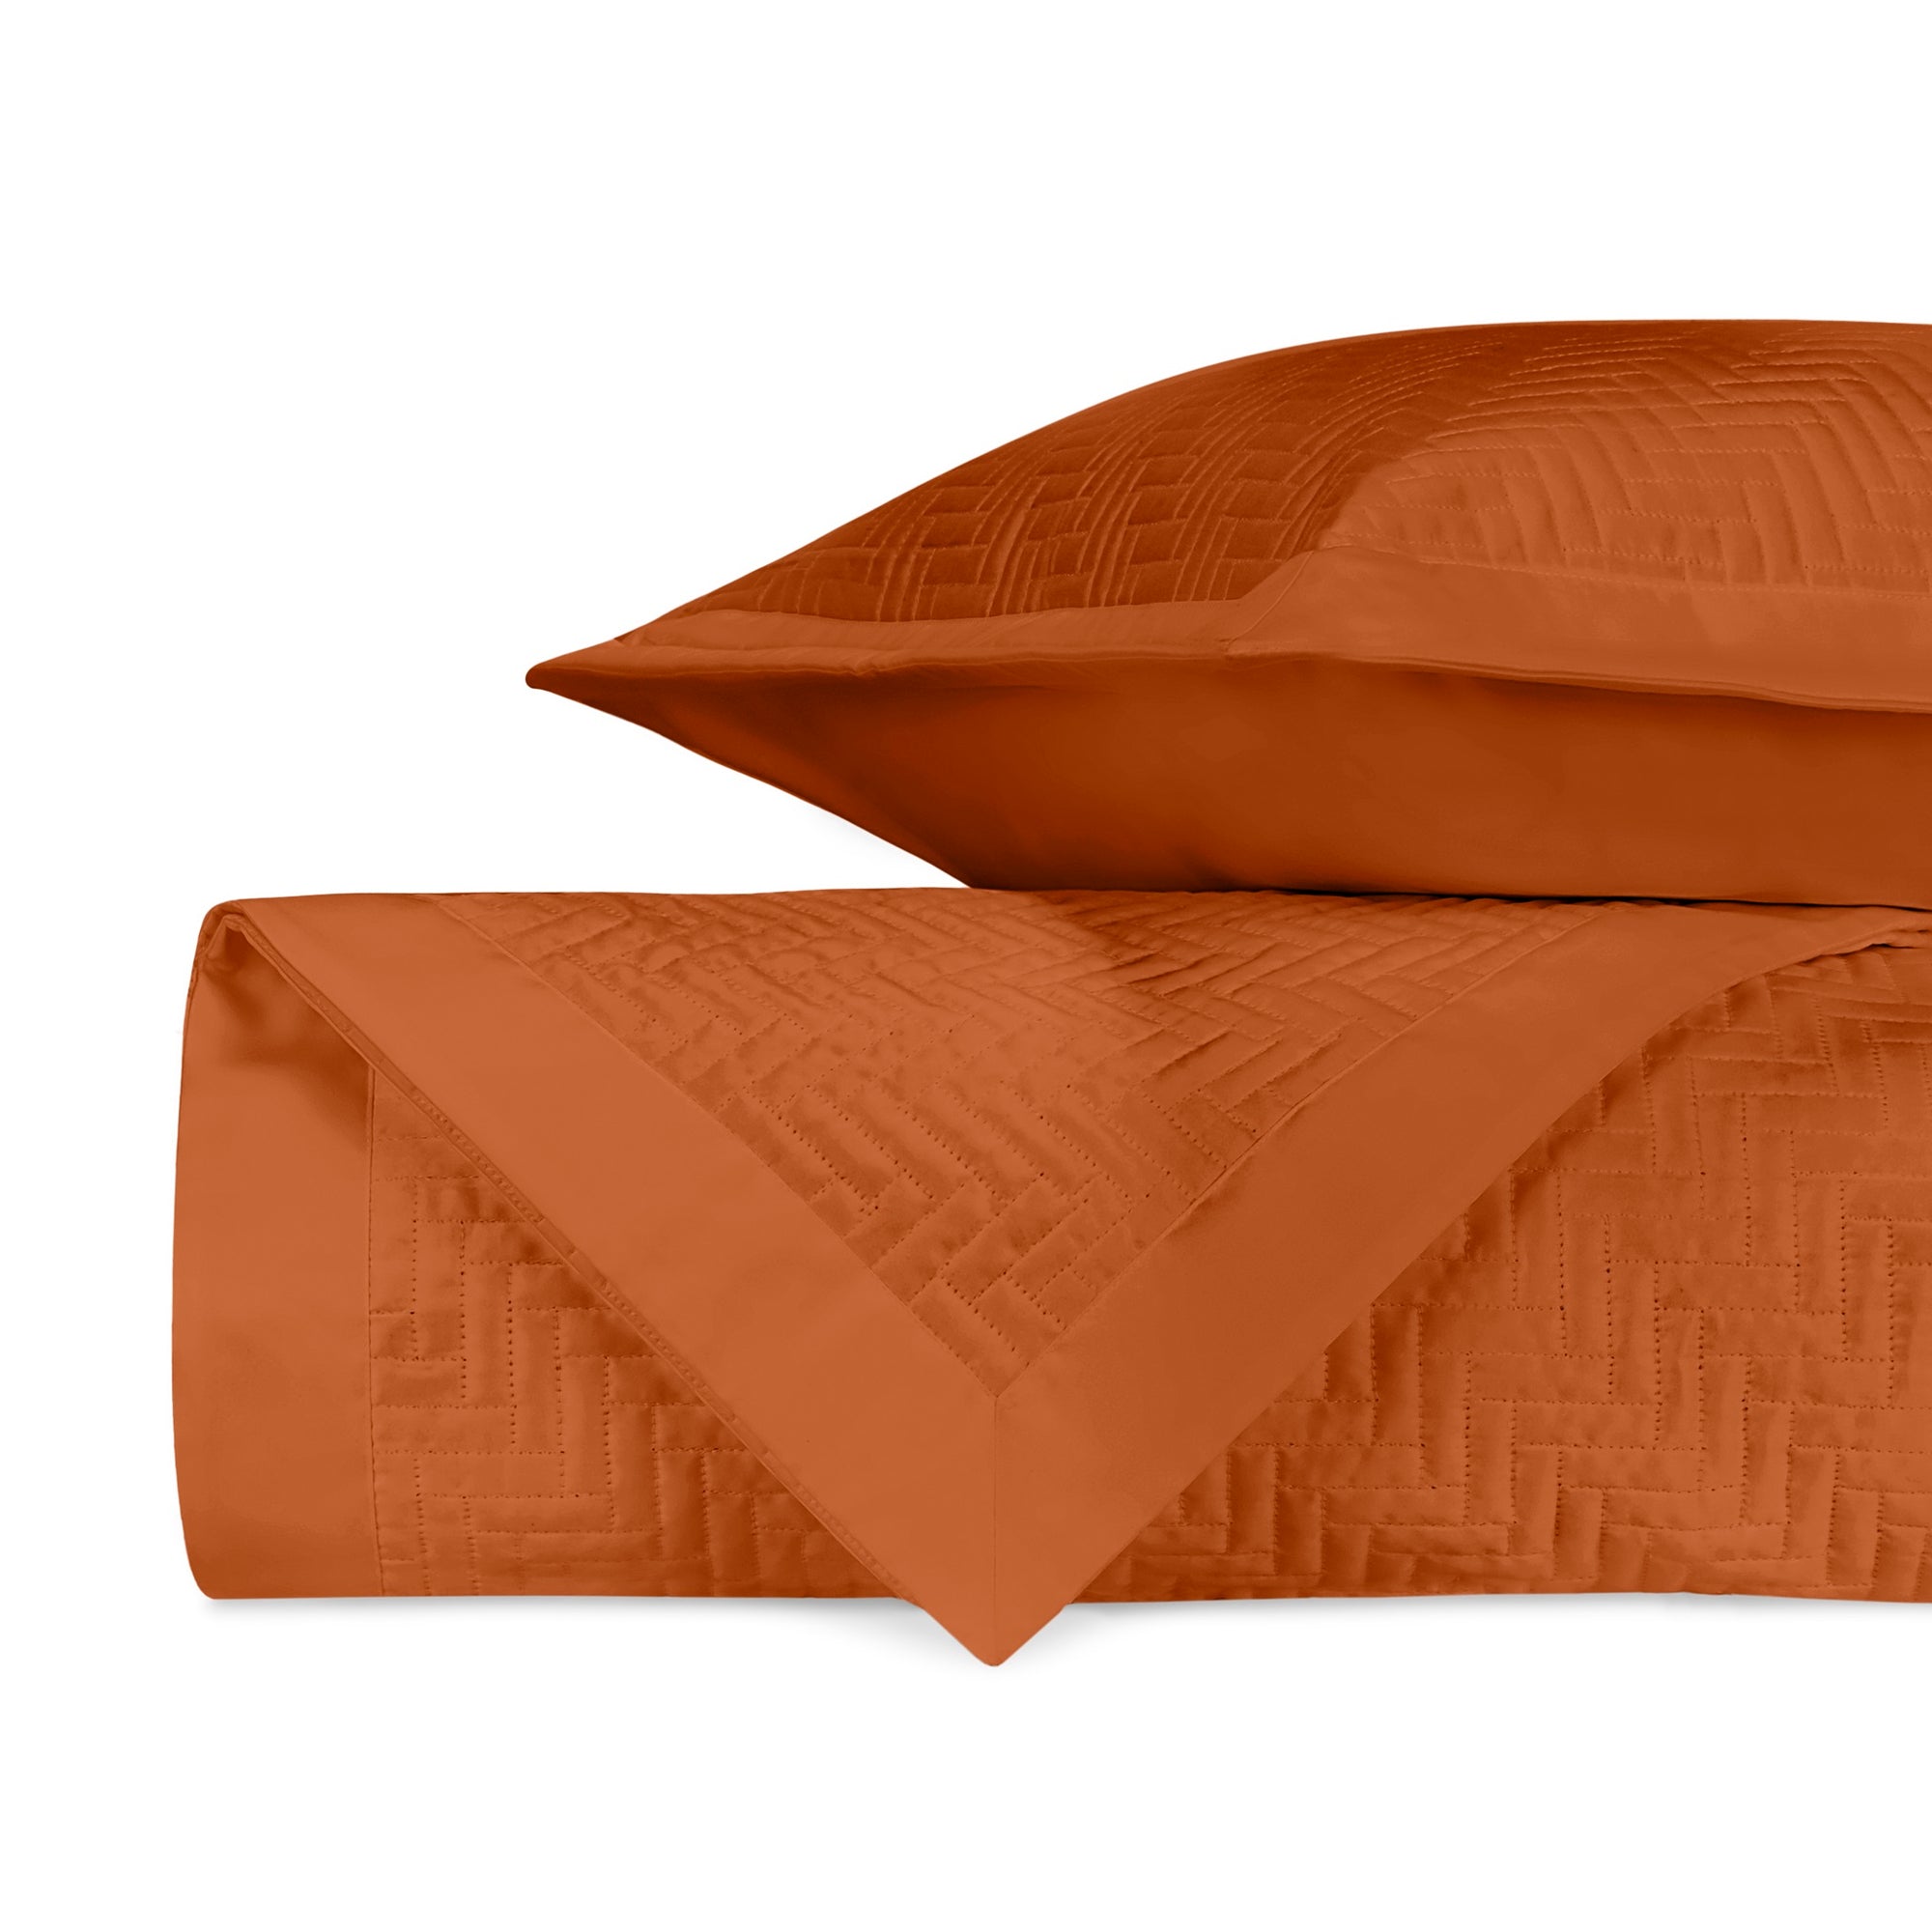 Stack Image of Home Treasures Baxter Royal Sateen Quilted Bedding in Color Clementine